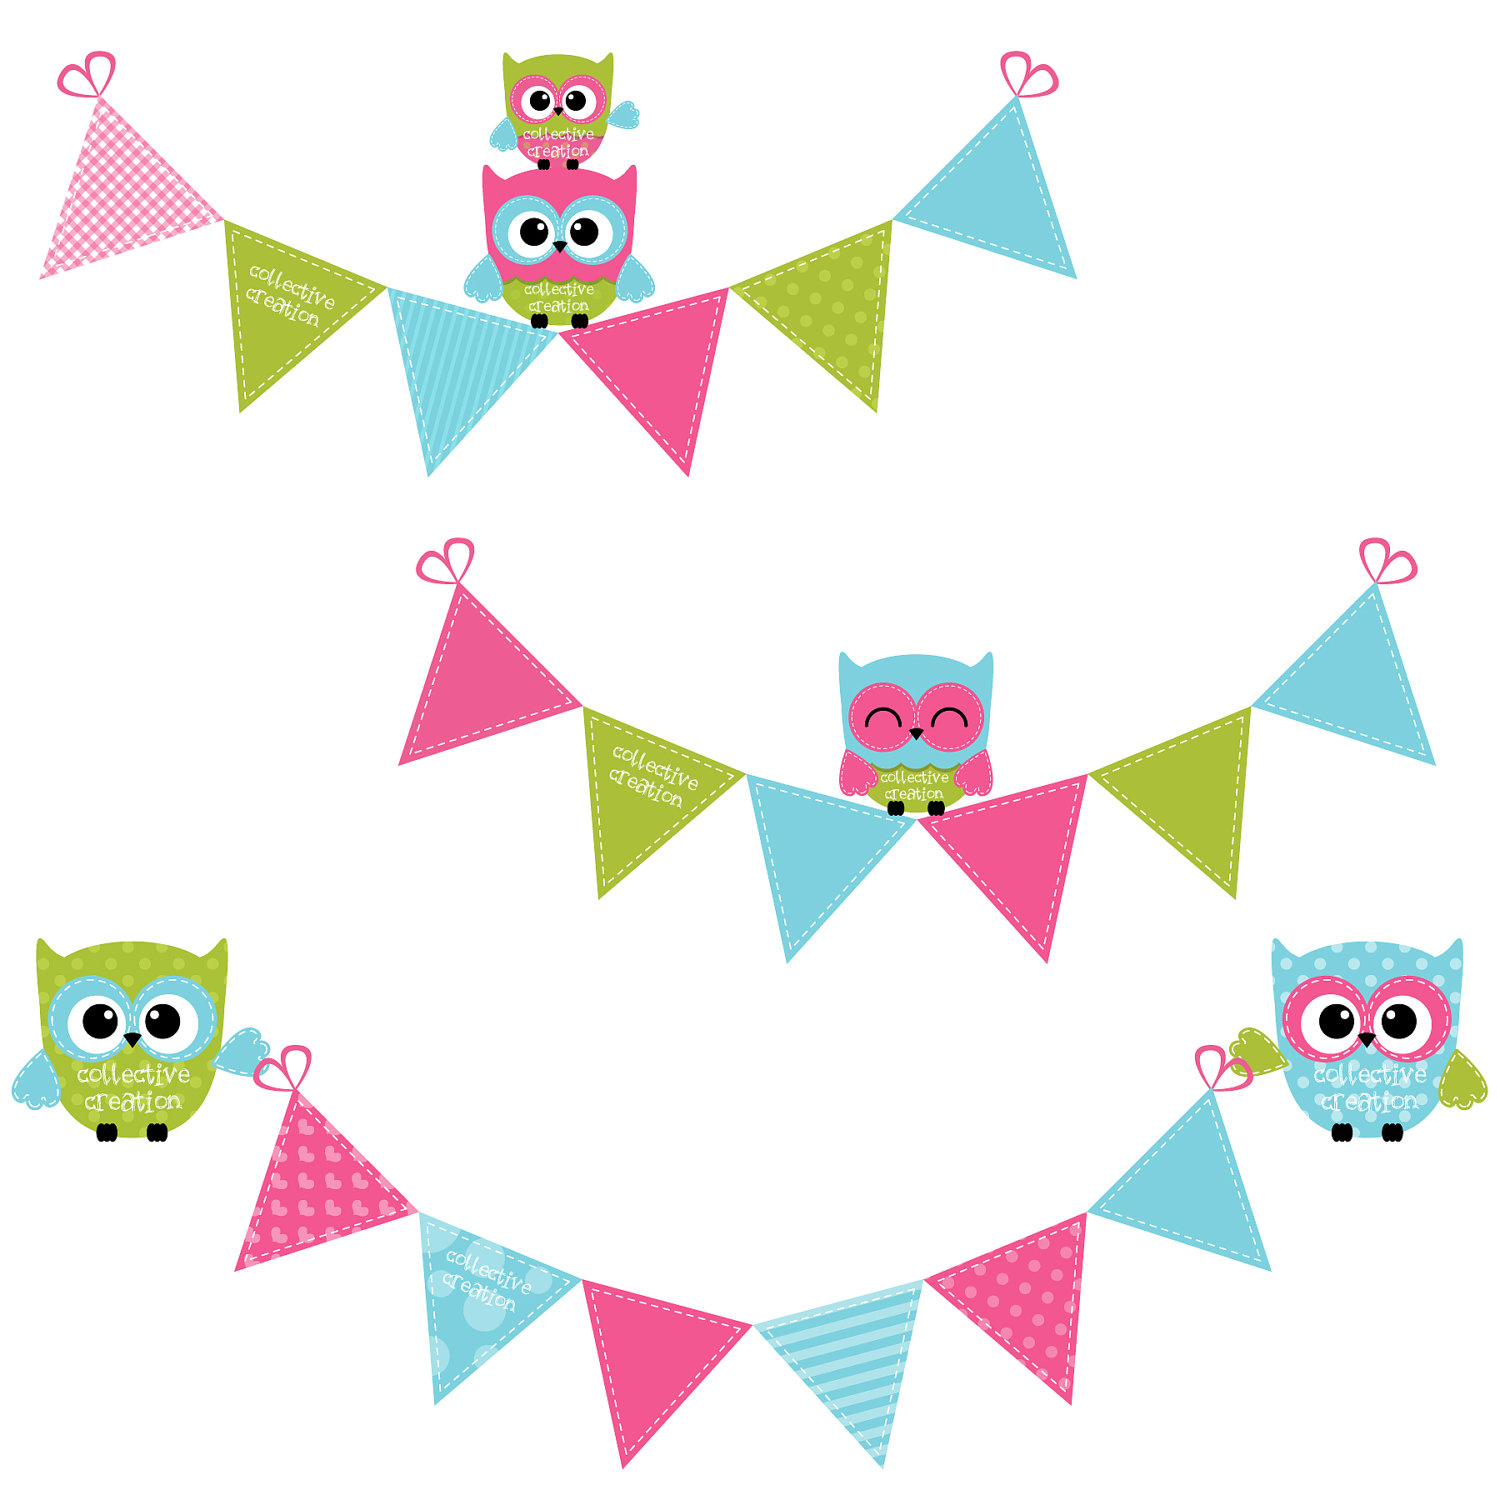 Cute Owls & Bunting Clipart in Bright Pink by CollectiveCreation